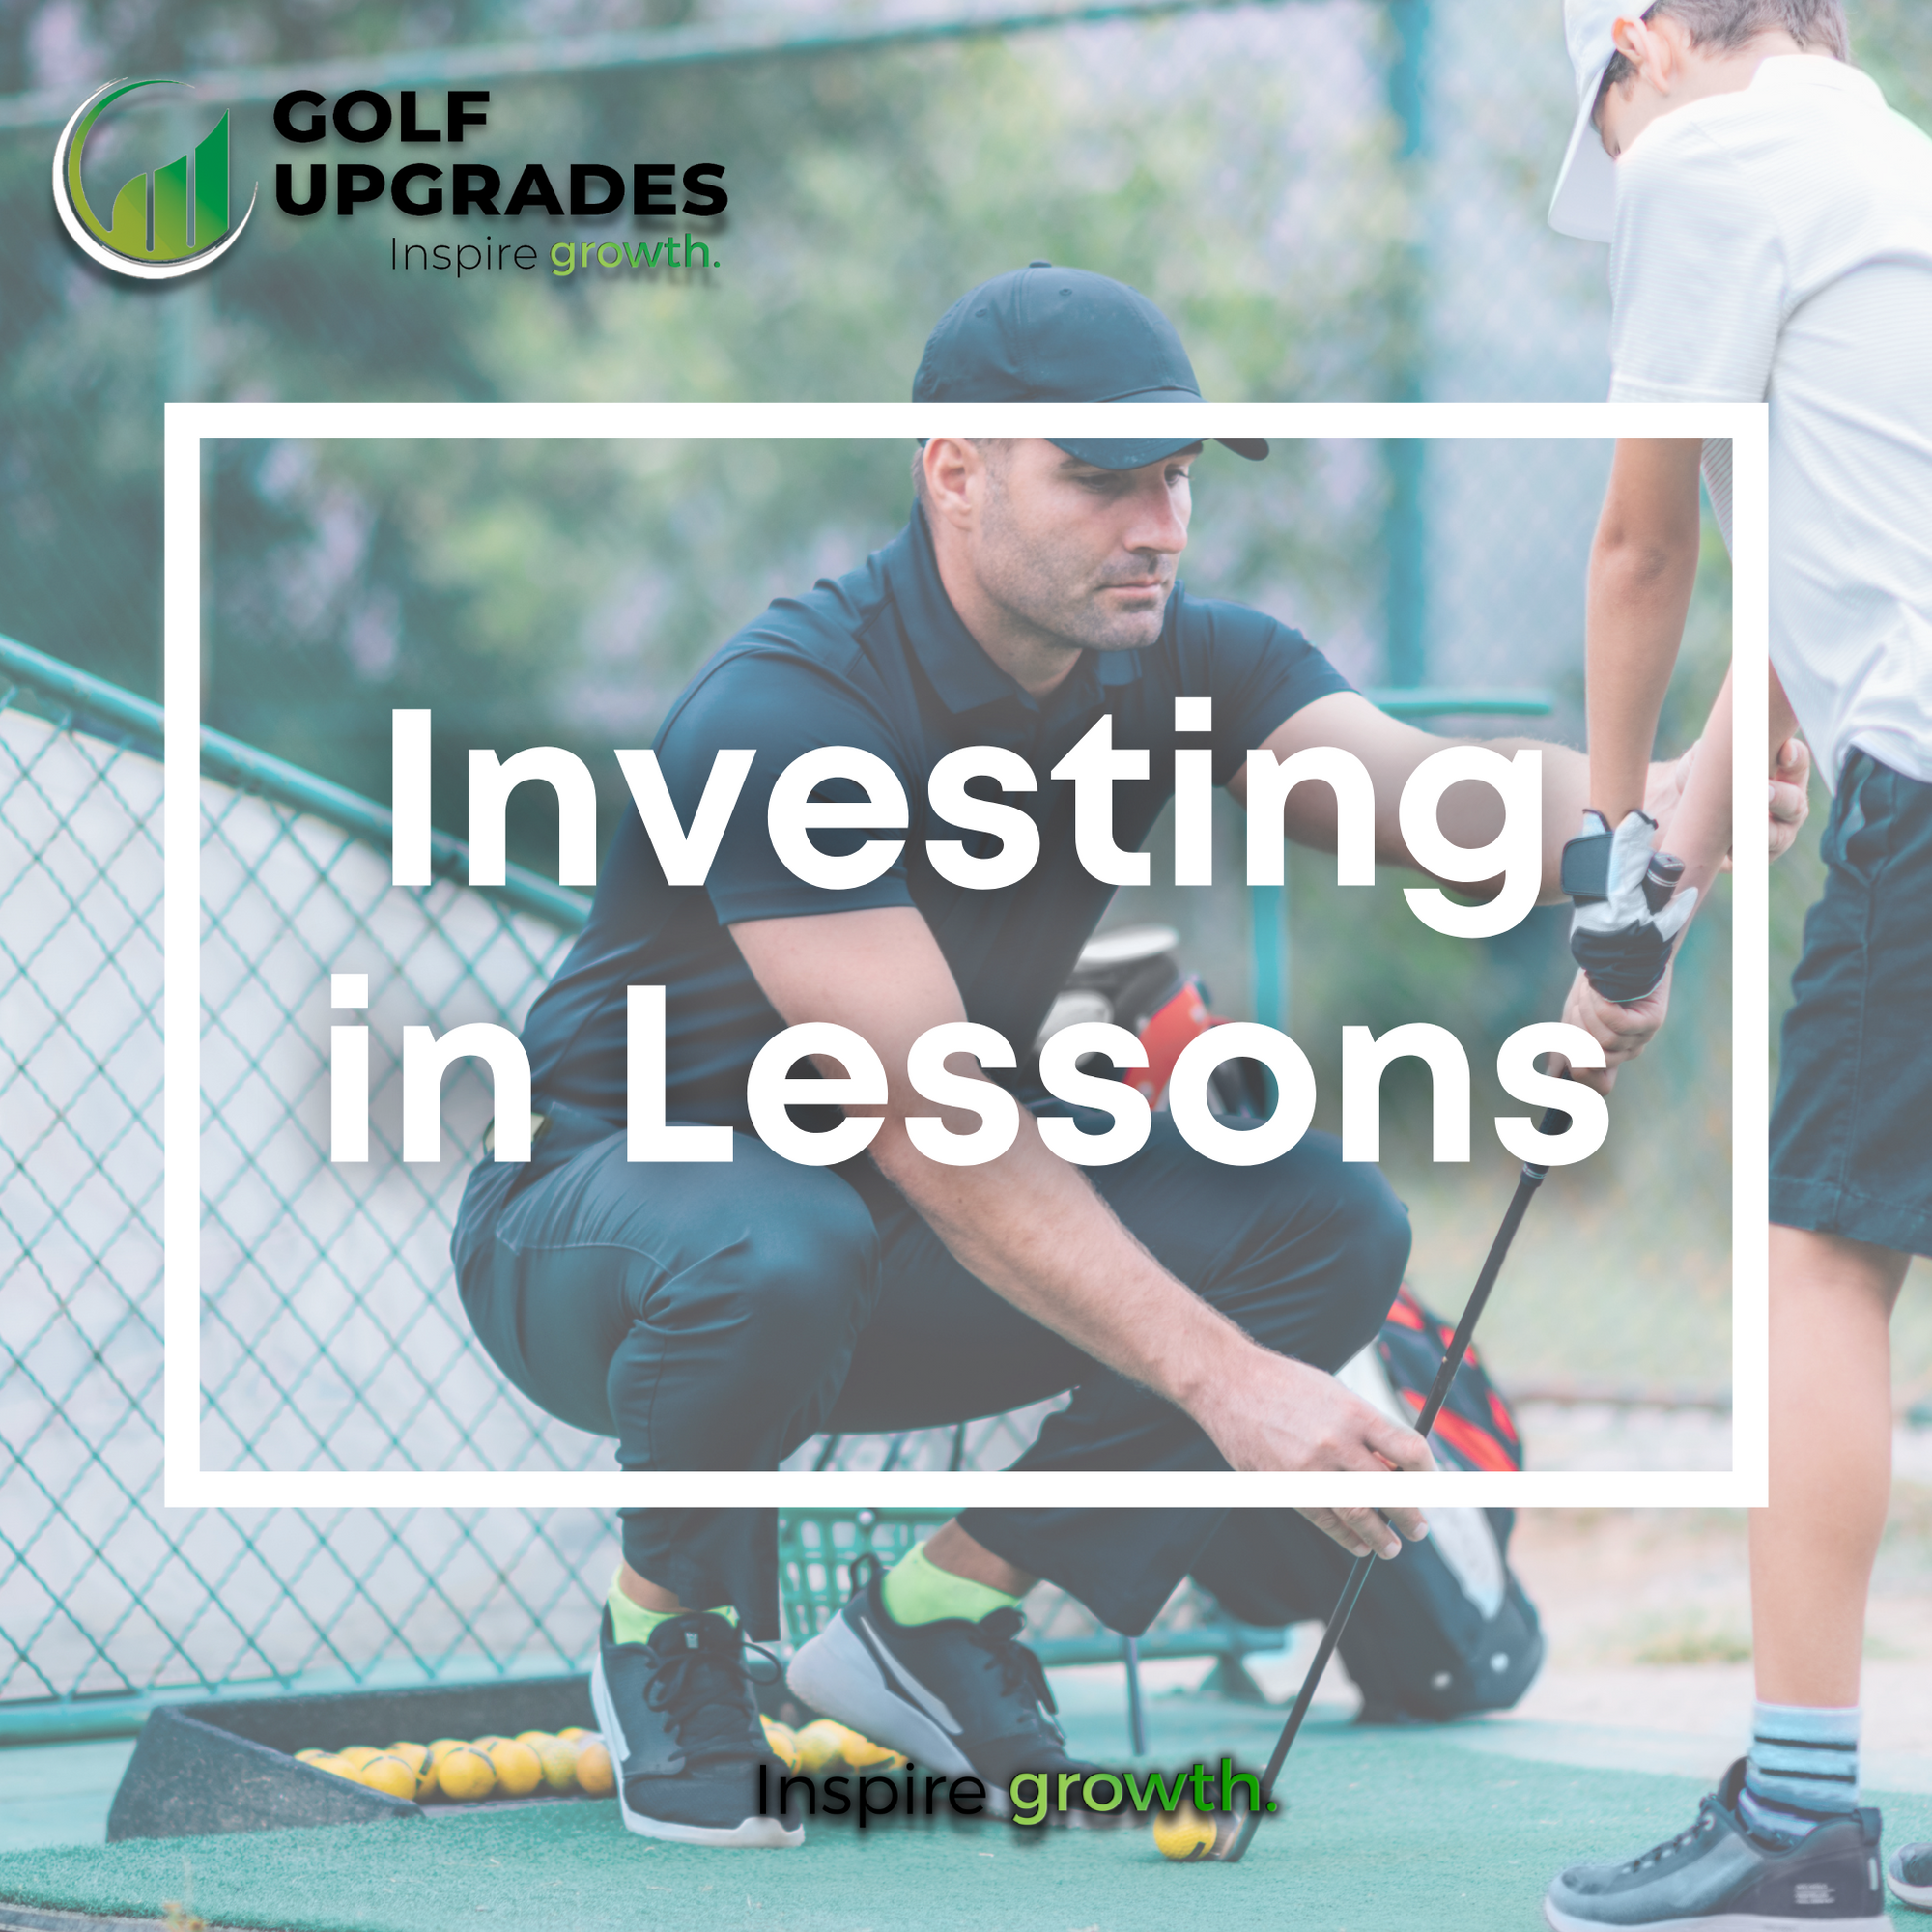 Why You Should Invest in Lessons From a Professional Golf Instructor | Golf Upgrades